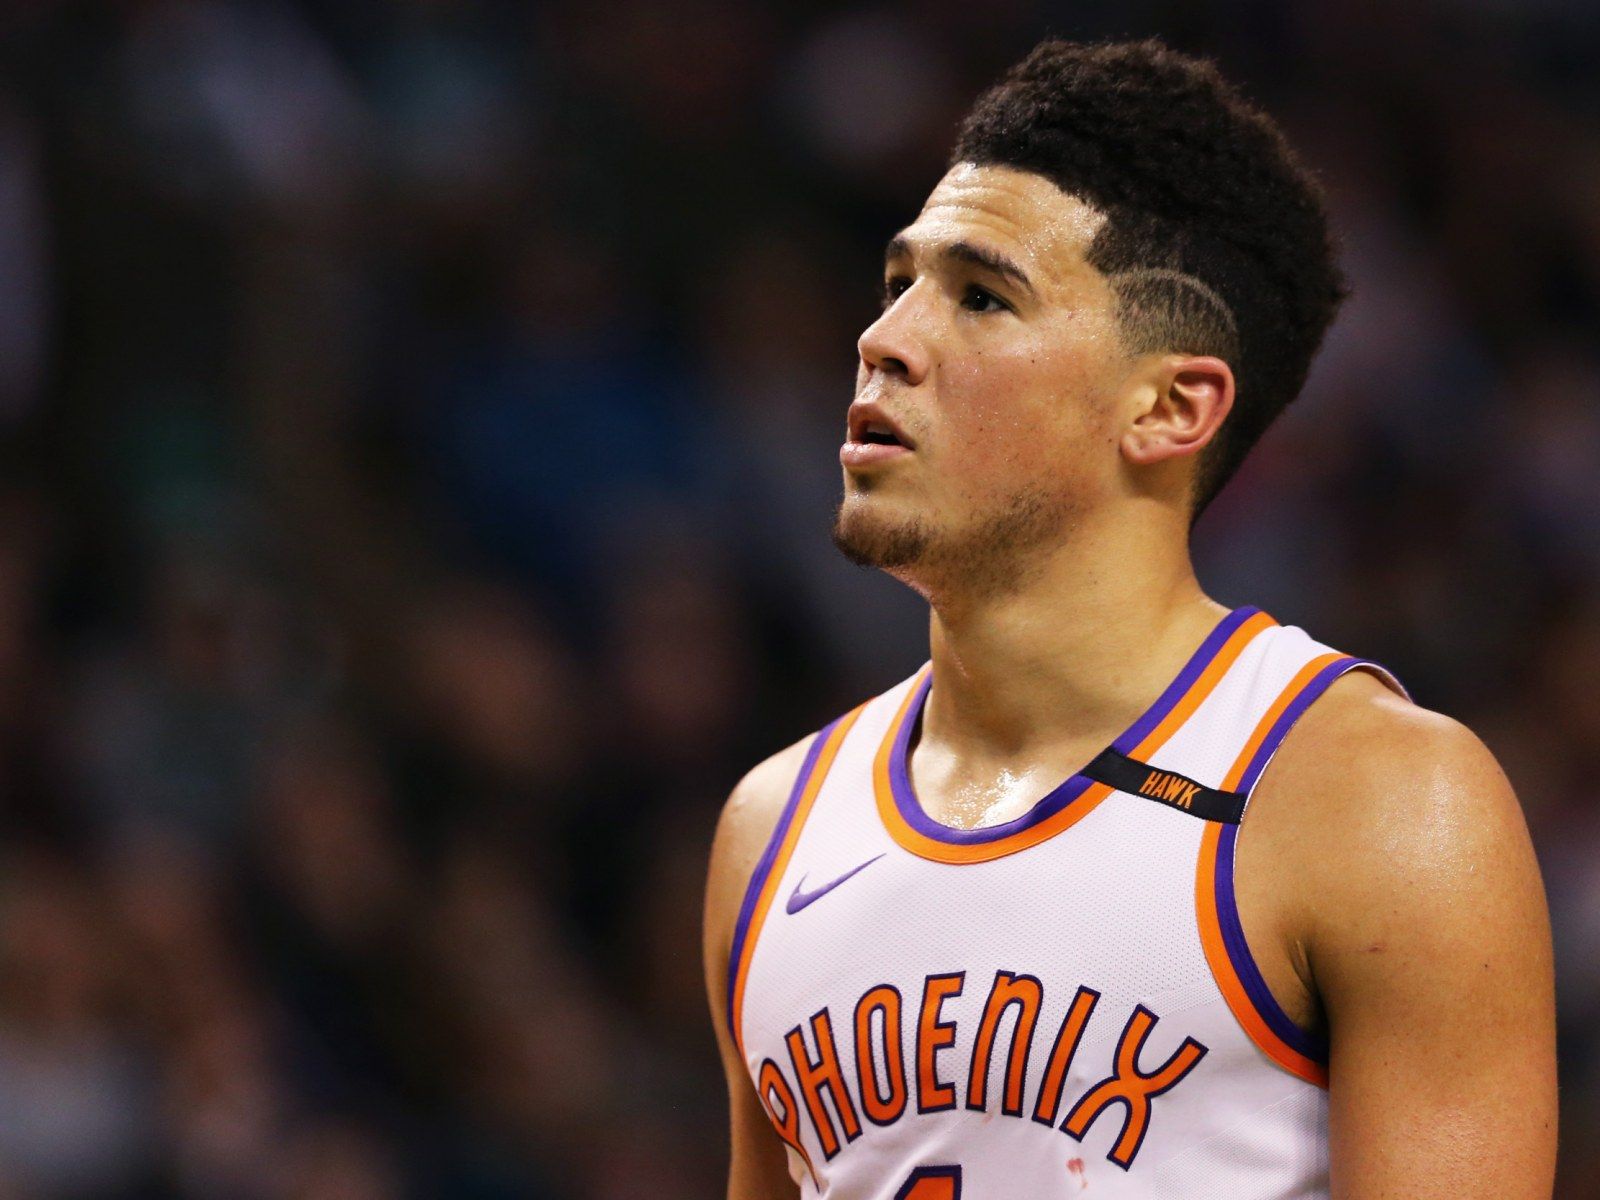 Suns' Devin Booker Responds To All Star Game Snub, Suggests League 'Put The Best Players